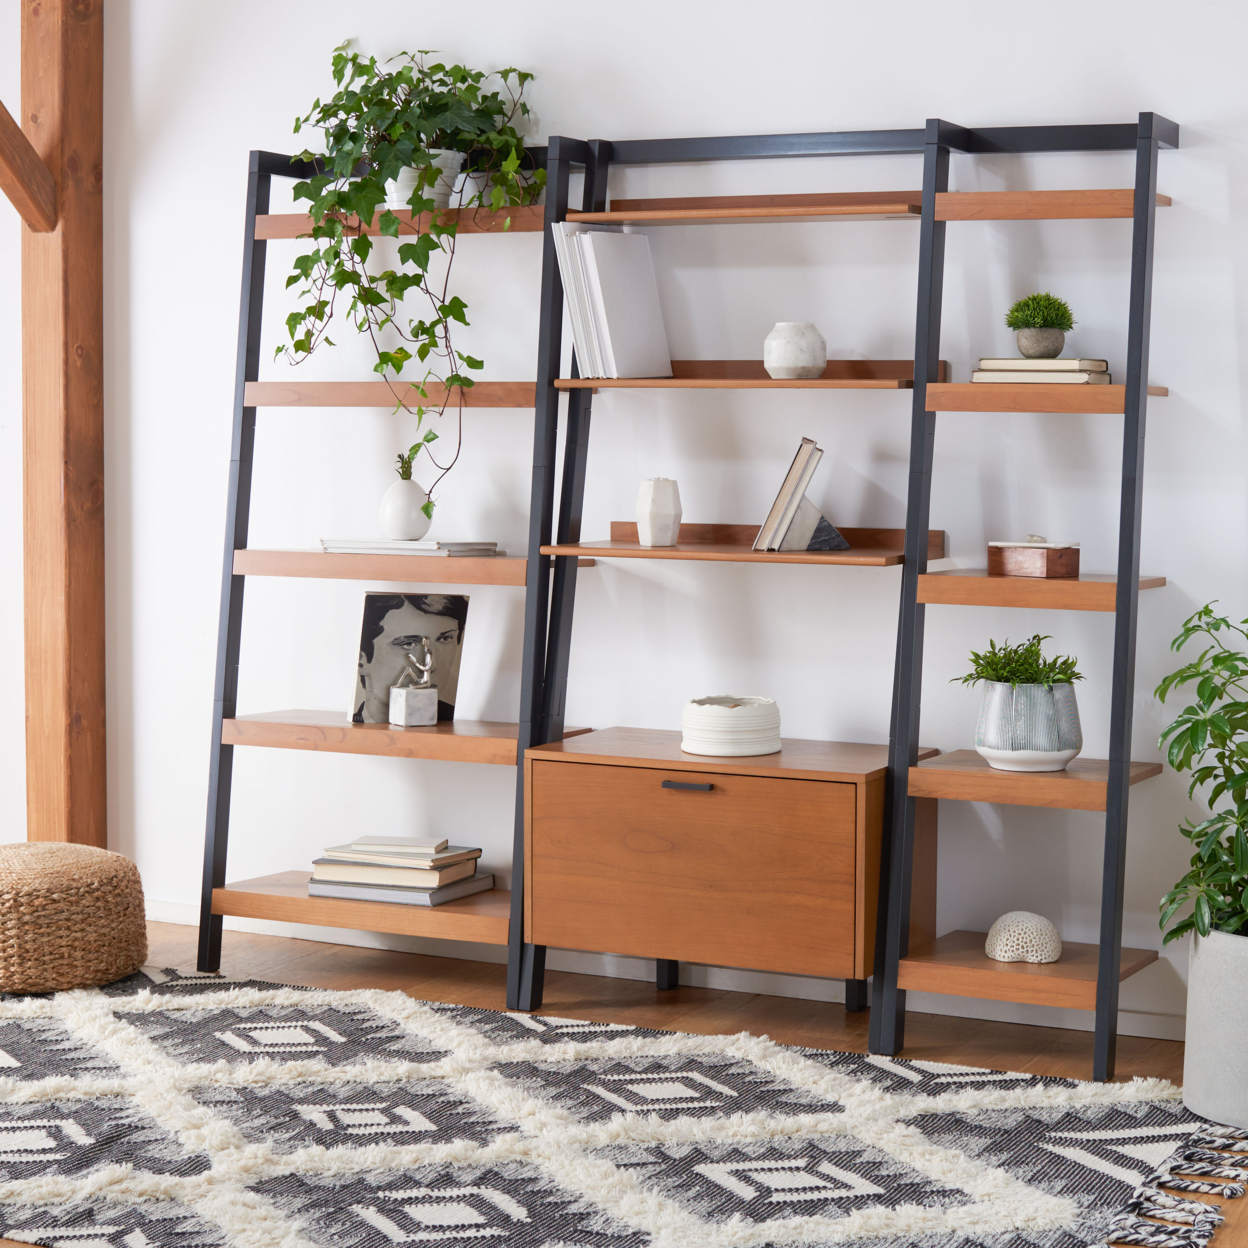 SAFAVIEH Yassi 5-Tier Leaning Etagere Natural/ Charcoal